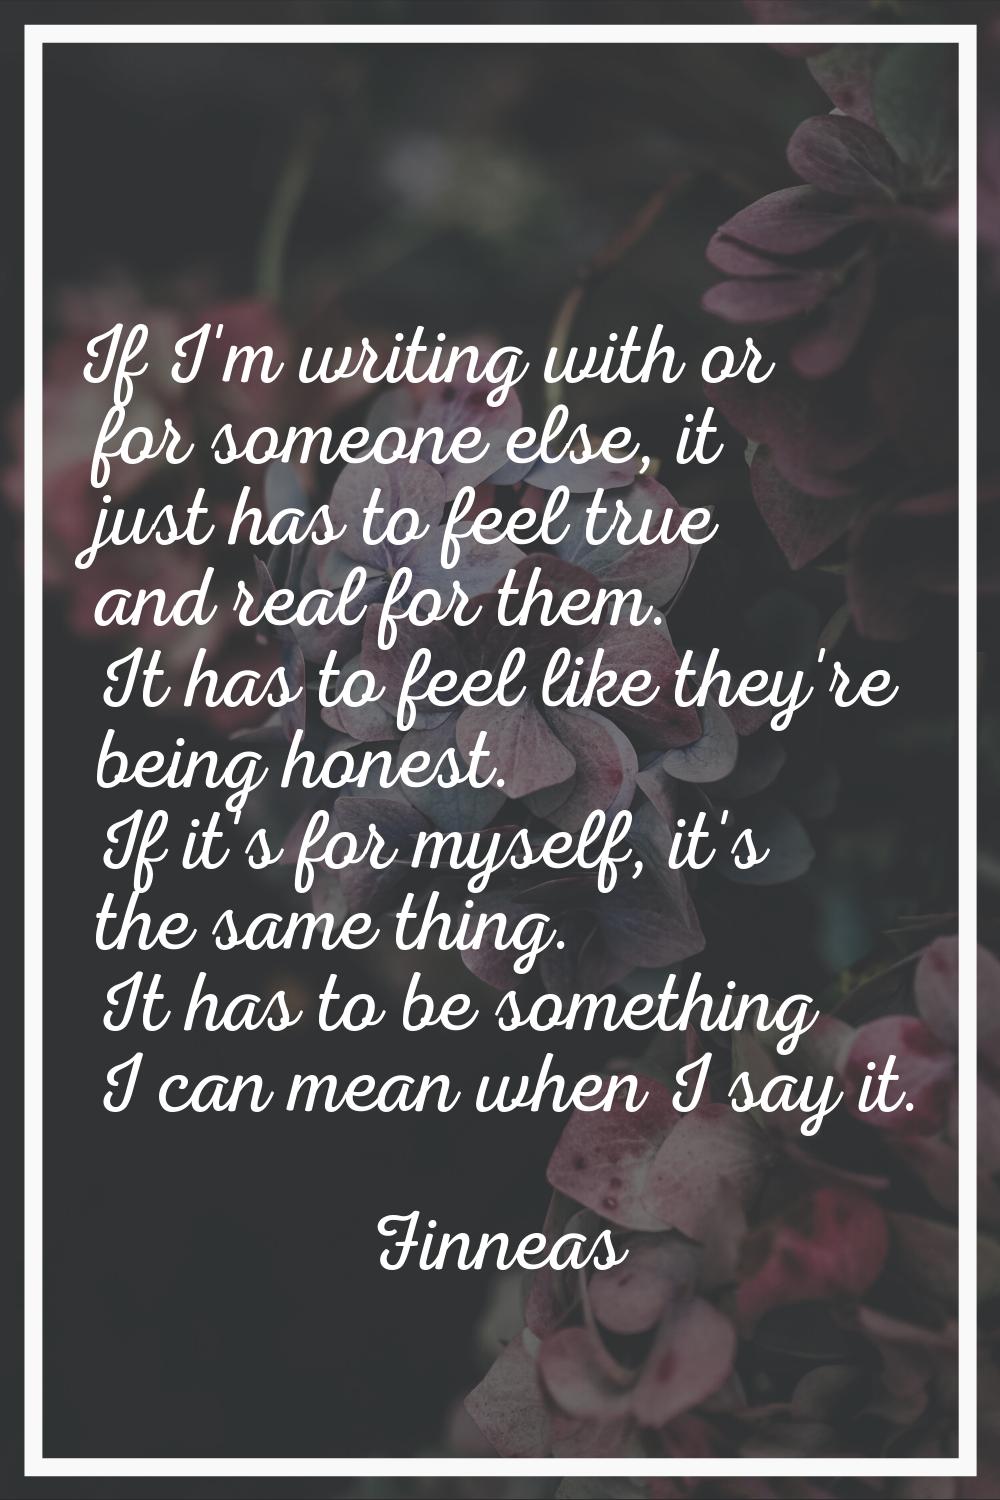 If I'm writing with or for someone else, it just has to feel true and real for them. It has to feel